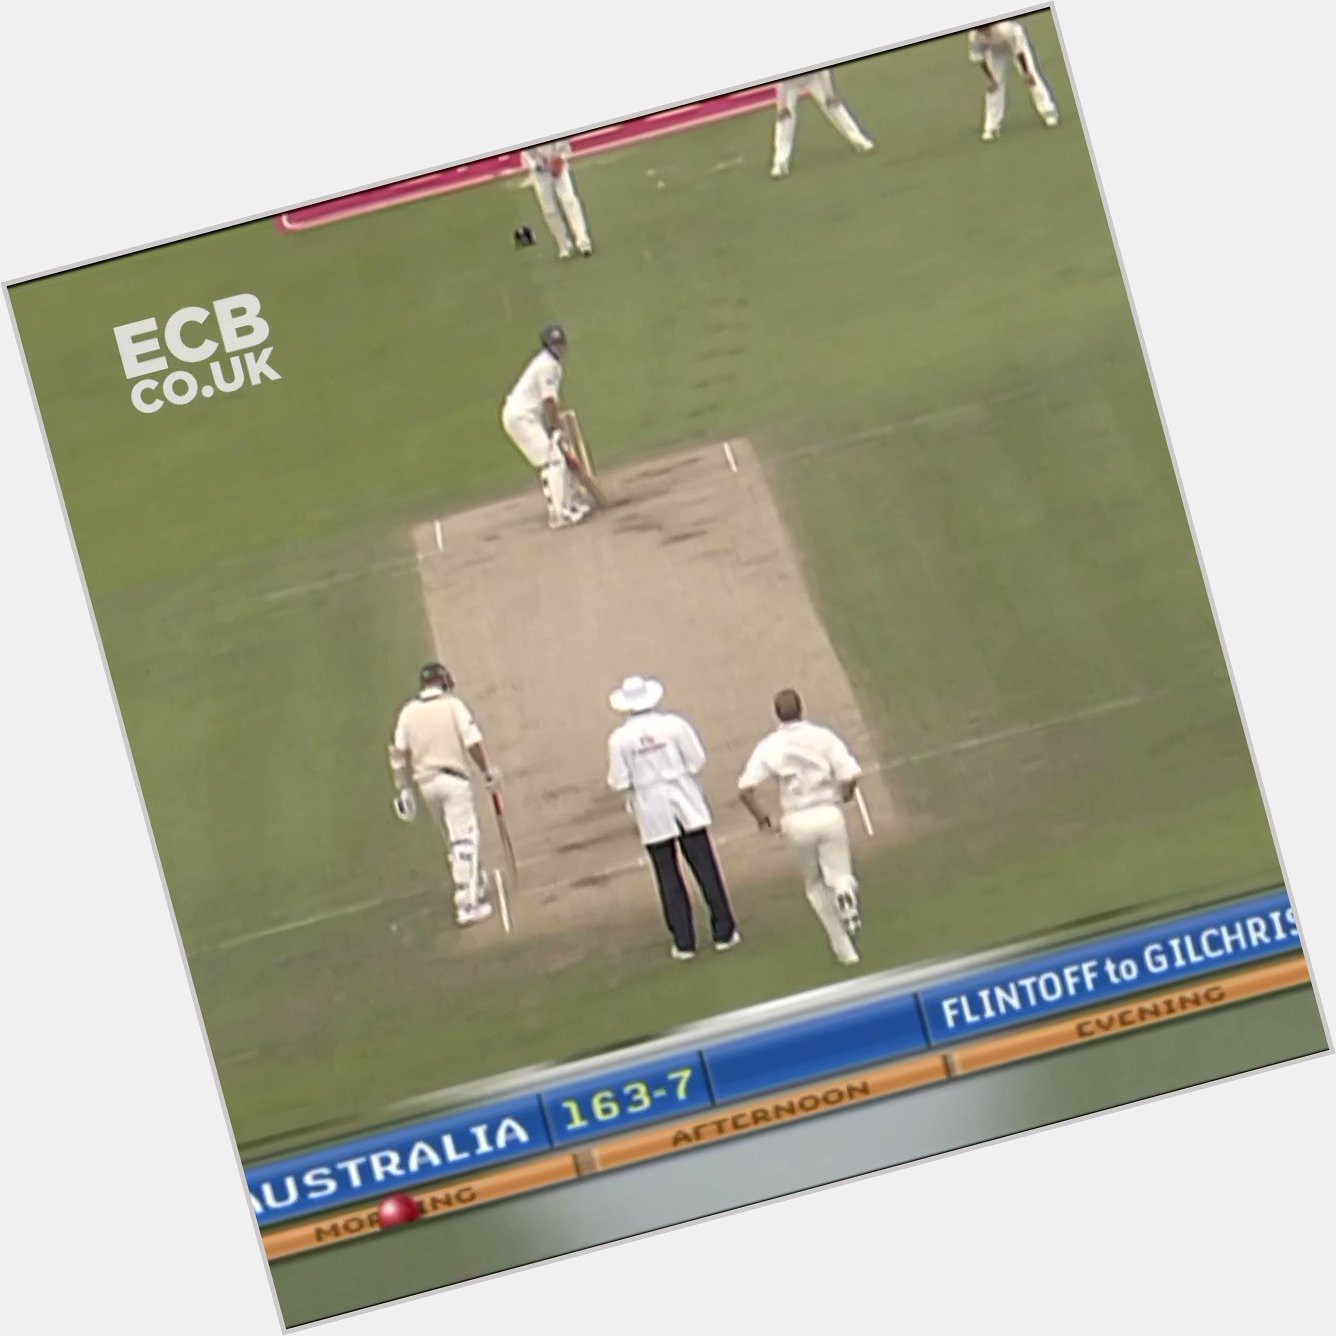 Happy Bday Andrew Strauss!

Will always be remembered for this humdinger in Ashes 2005!

